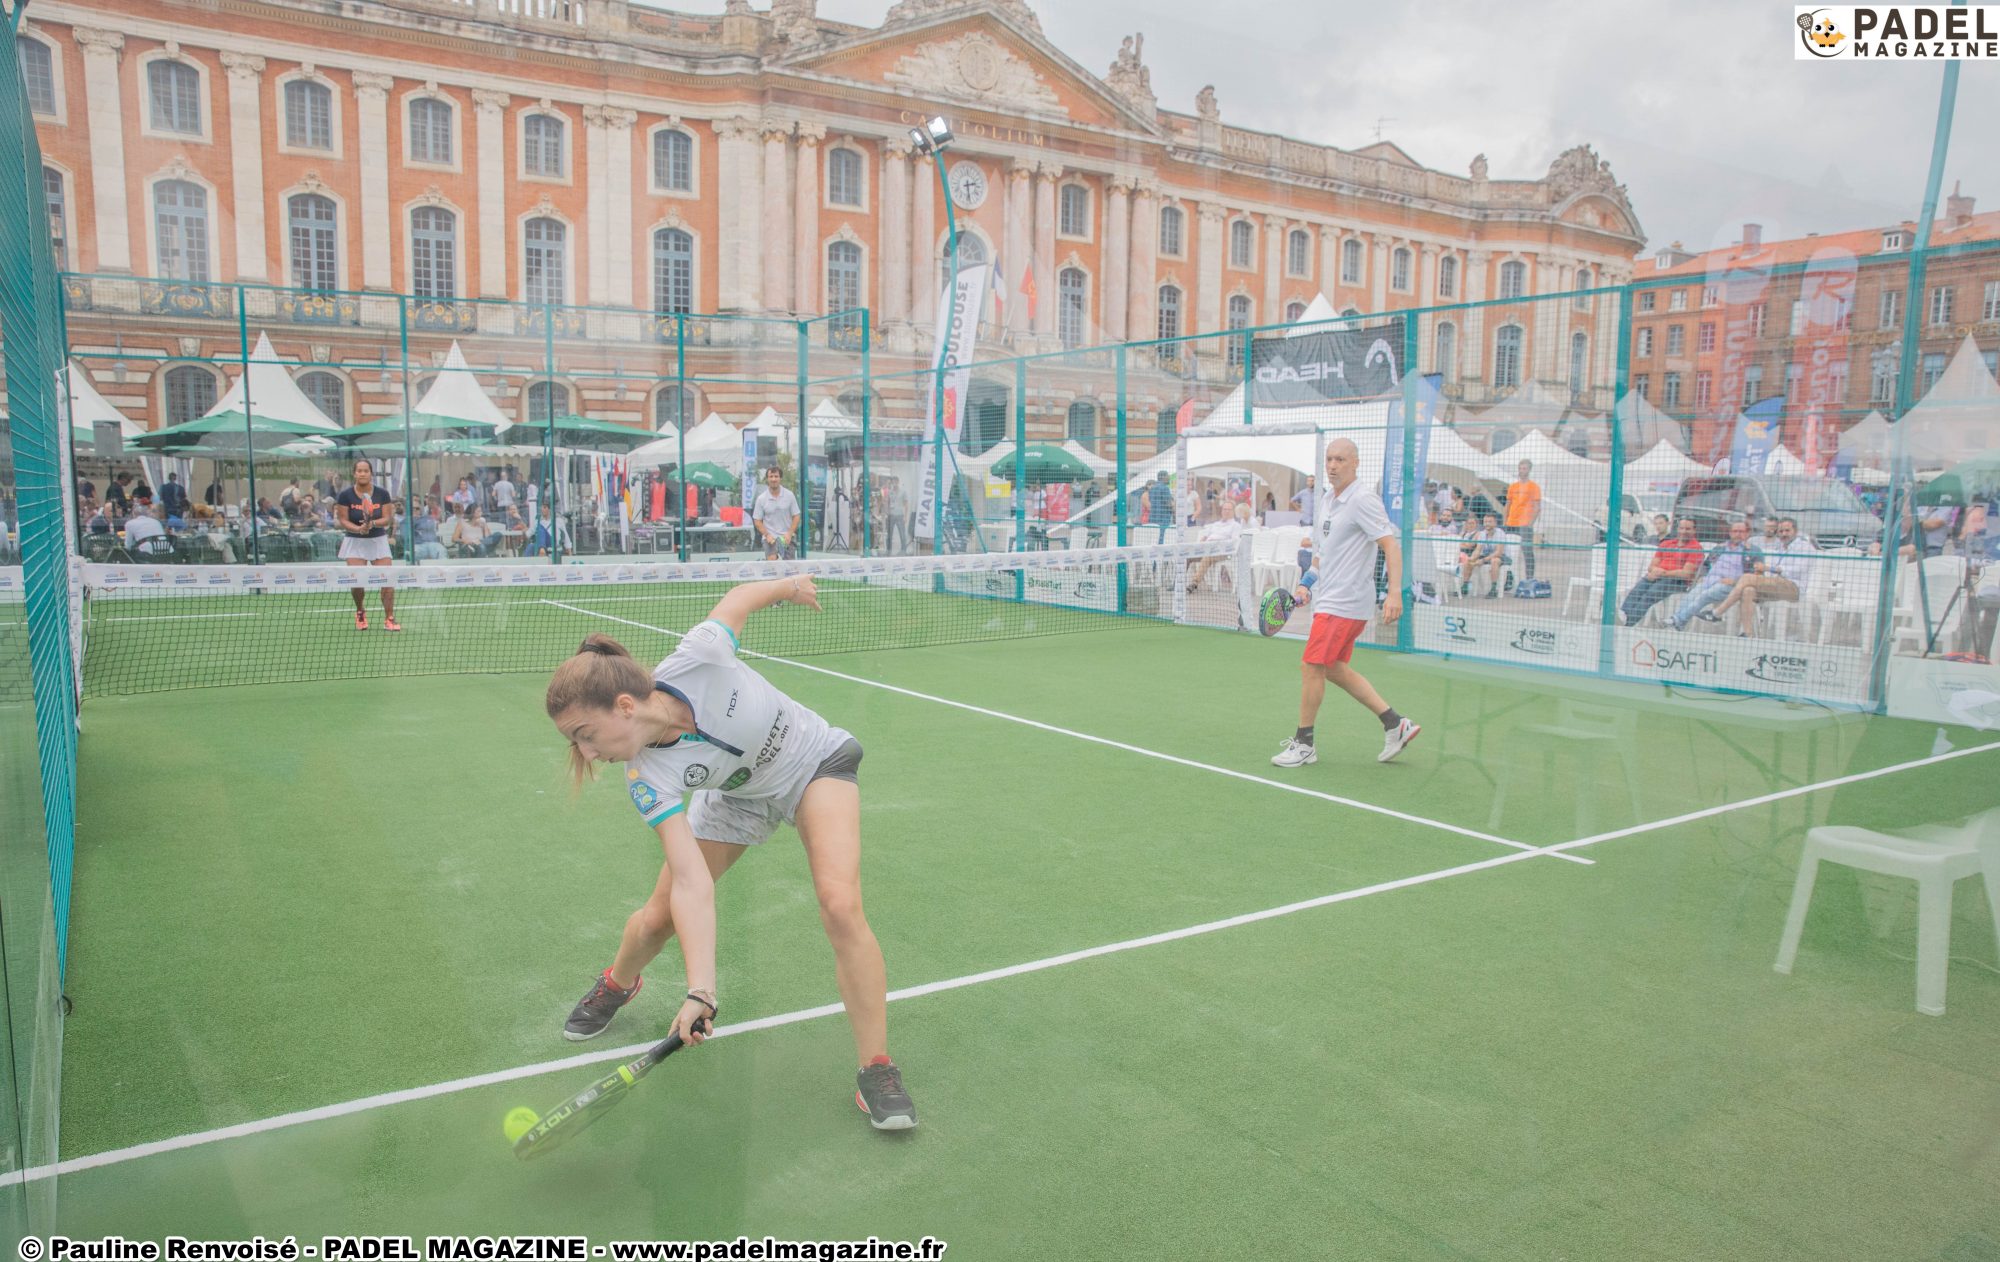 The French Open of padel 2018 under the sun